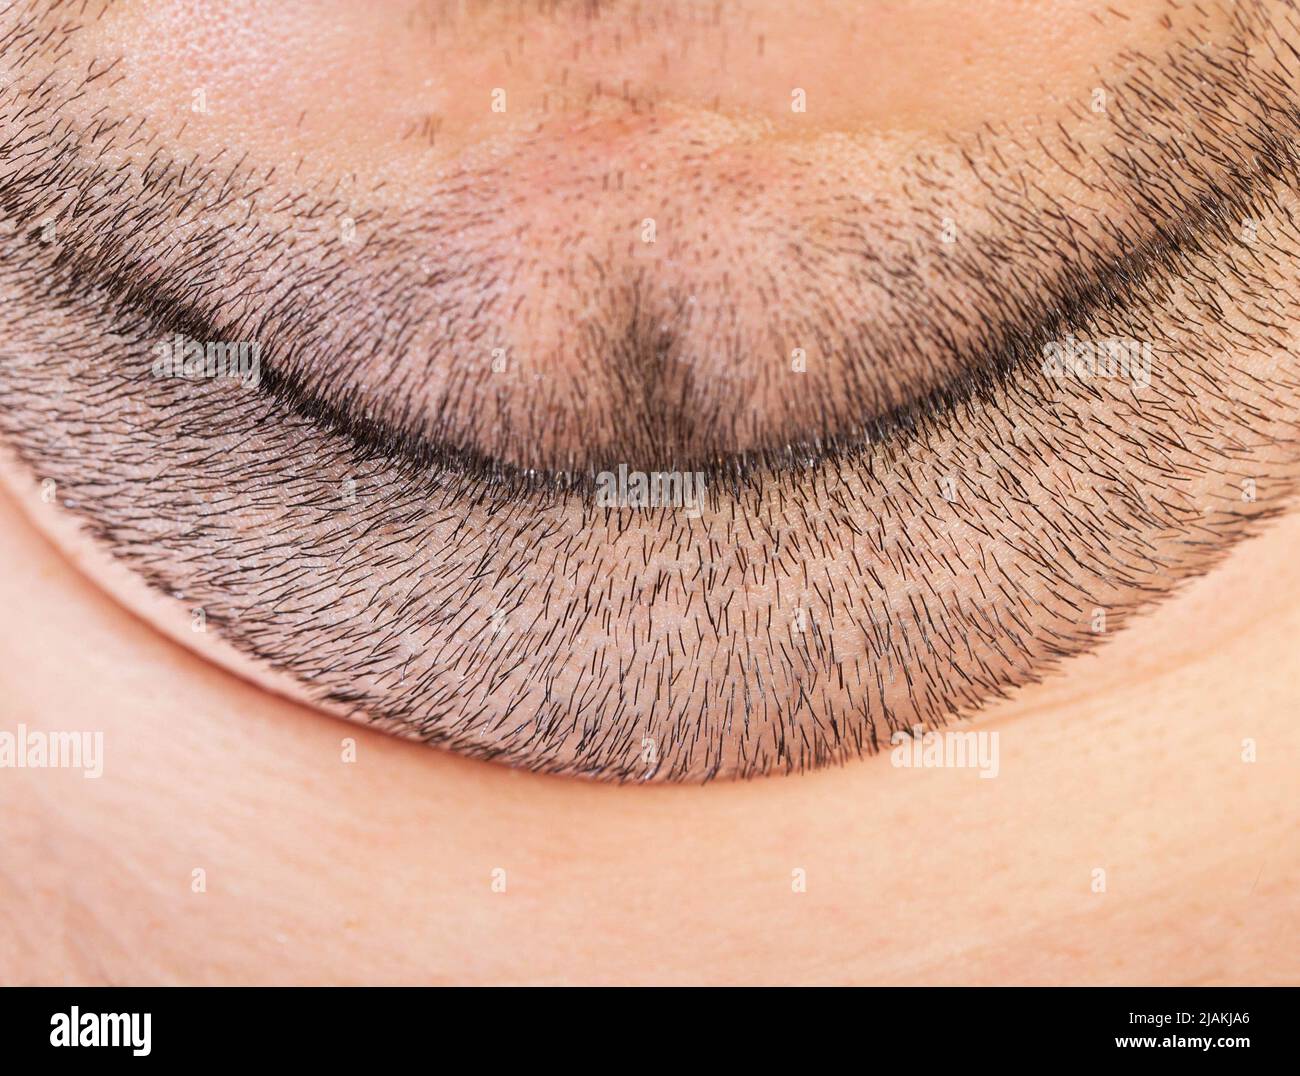 Thick double chin with stubble on the face. Aesthetic defect, chin correction exercises Stock Photo